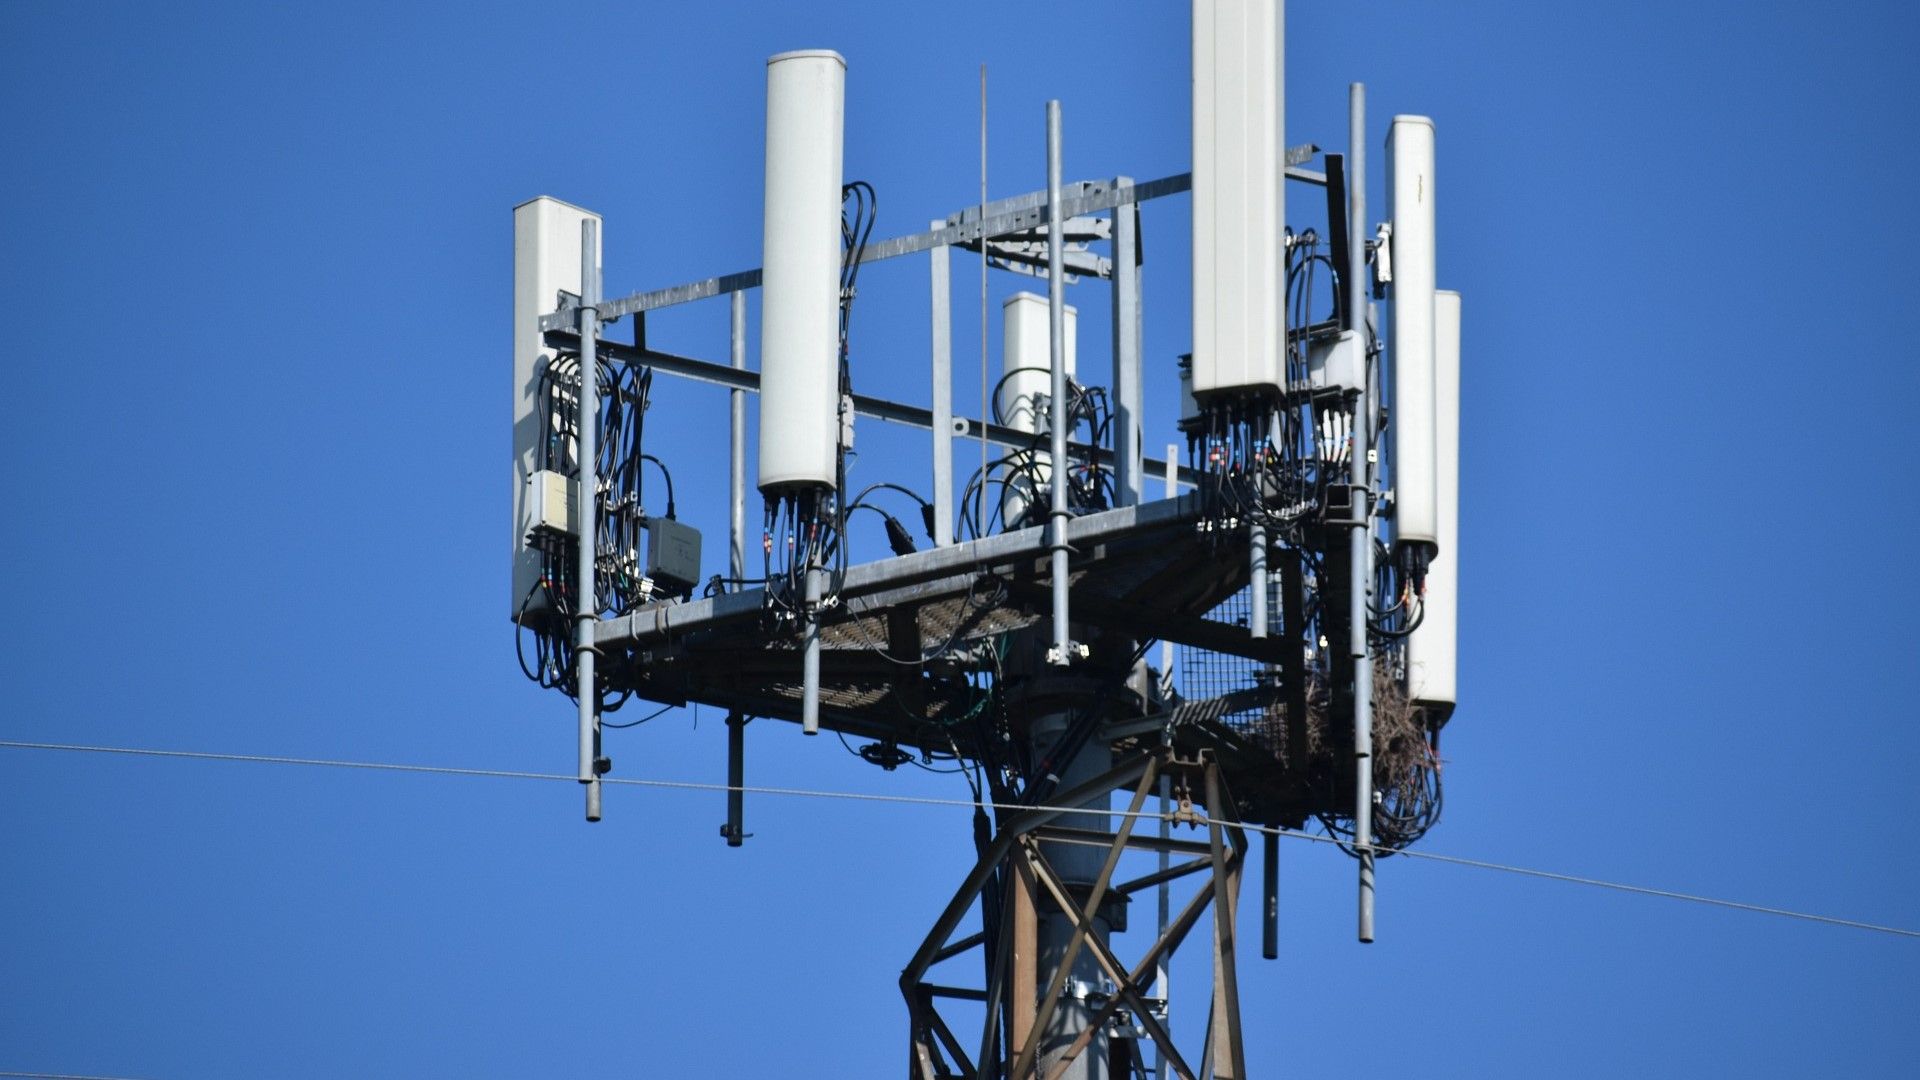 An example image of what a cell tower might look like with a blue sky background